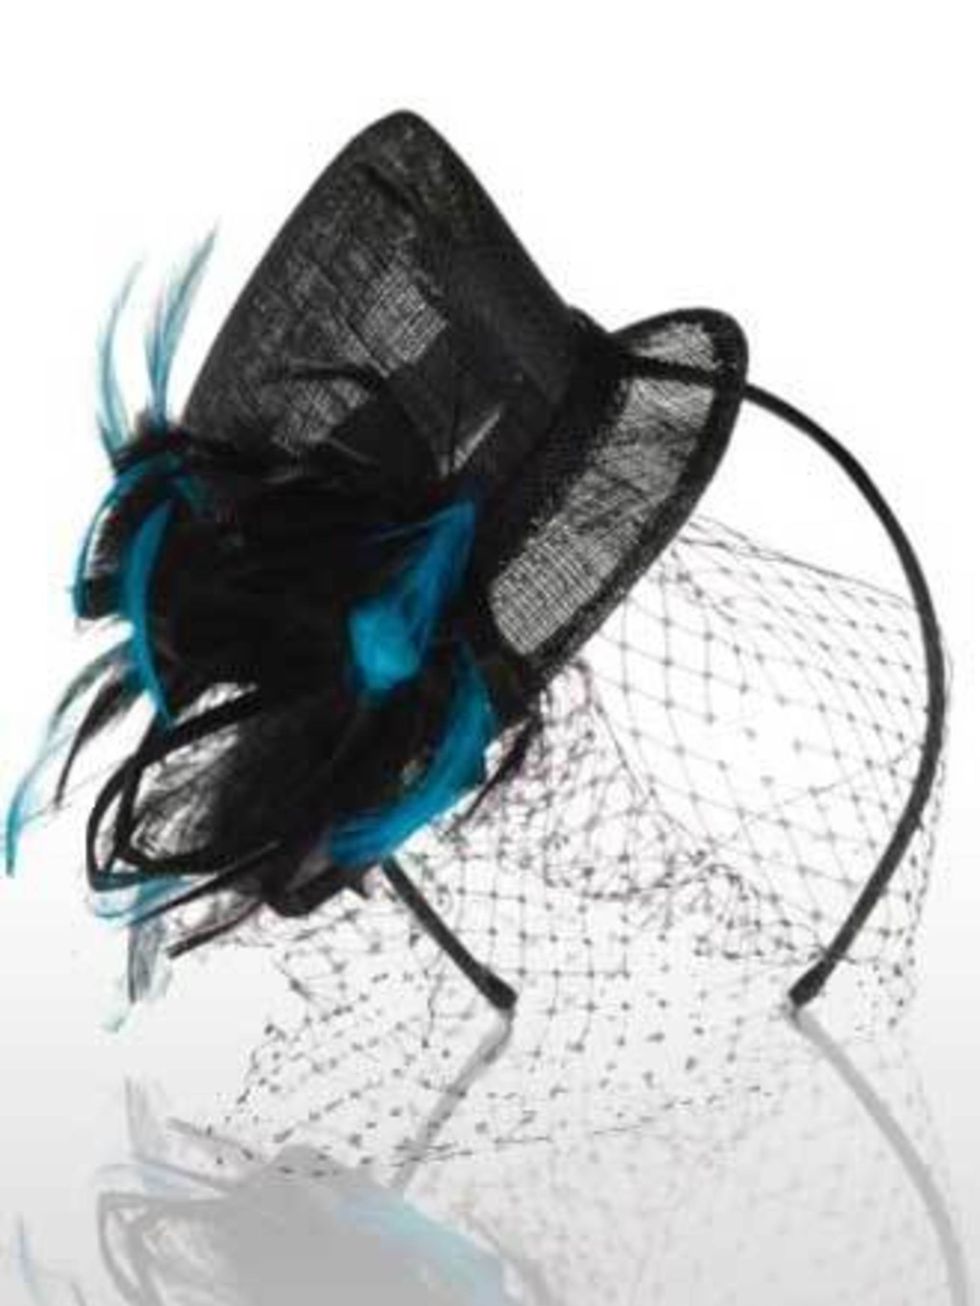 <p>Fascinator, £28 by <a href="http://www.monsoon.co.uk/invt/49143503&amp;bklist=icat,5,shop,accessorize,hairaccz,fascinations">Accessorize</a></p><p>Usually reserved for weddings and christenings, Luella has made fascinators the It accessory for summer.<